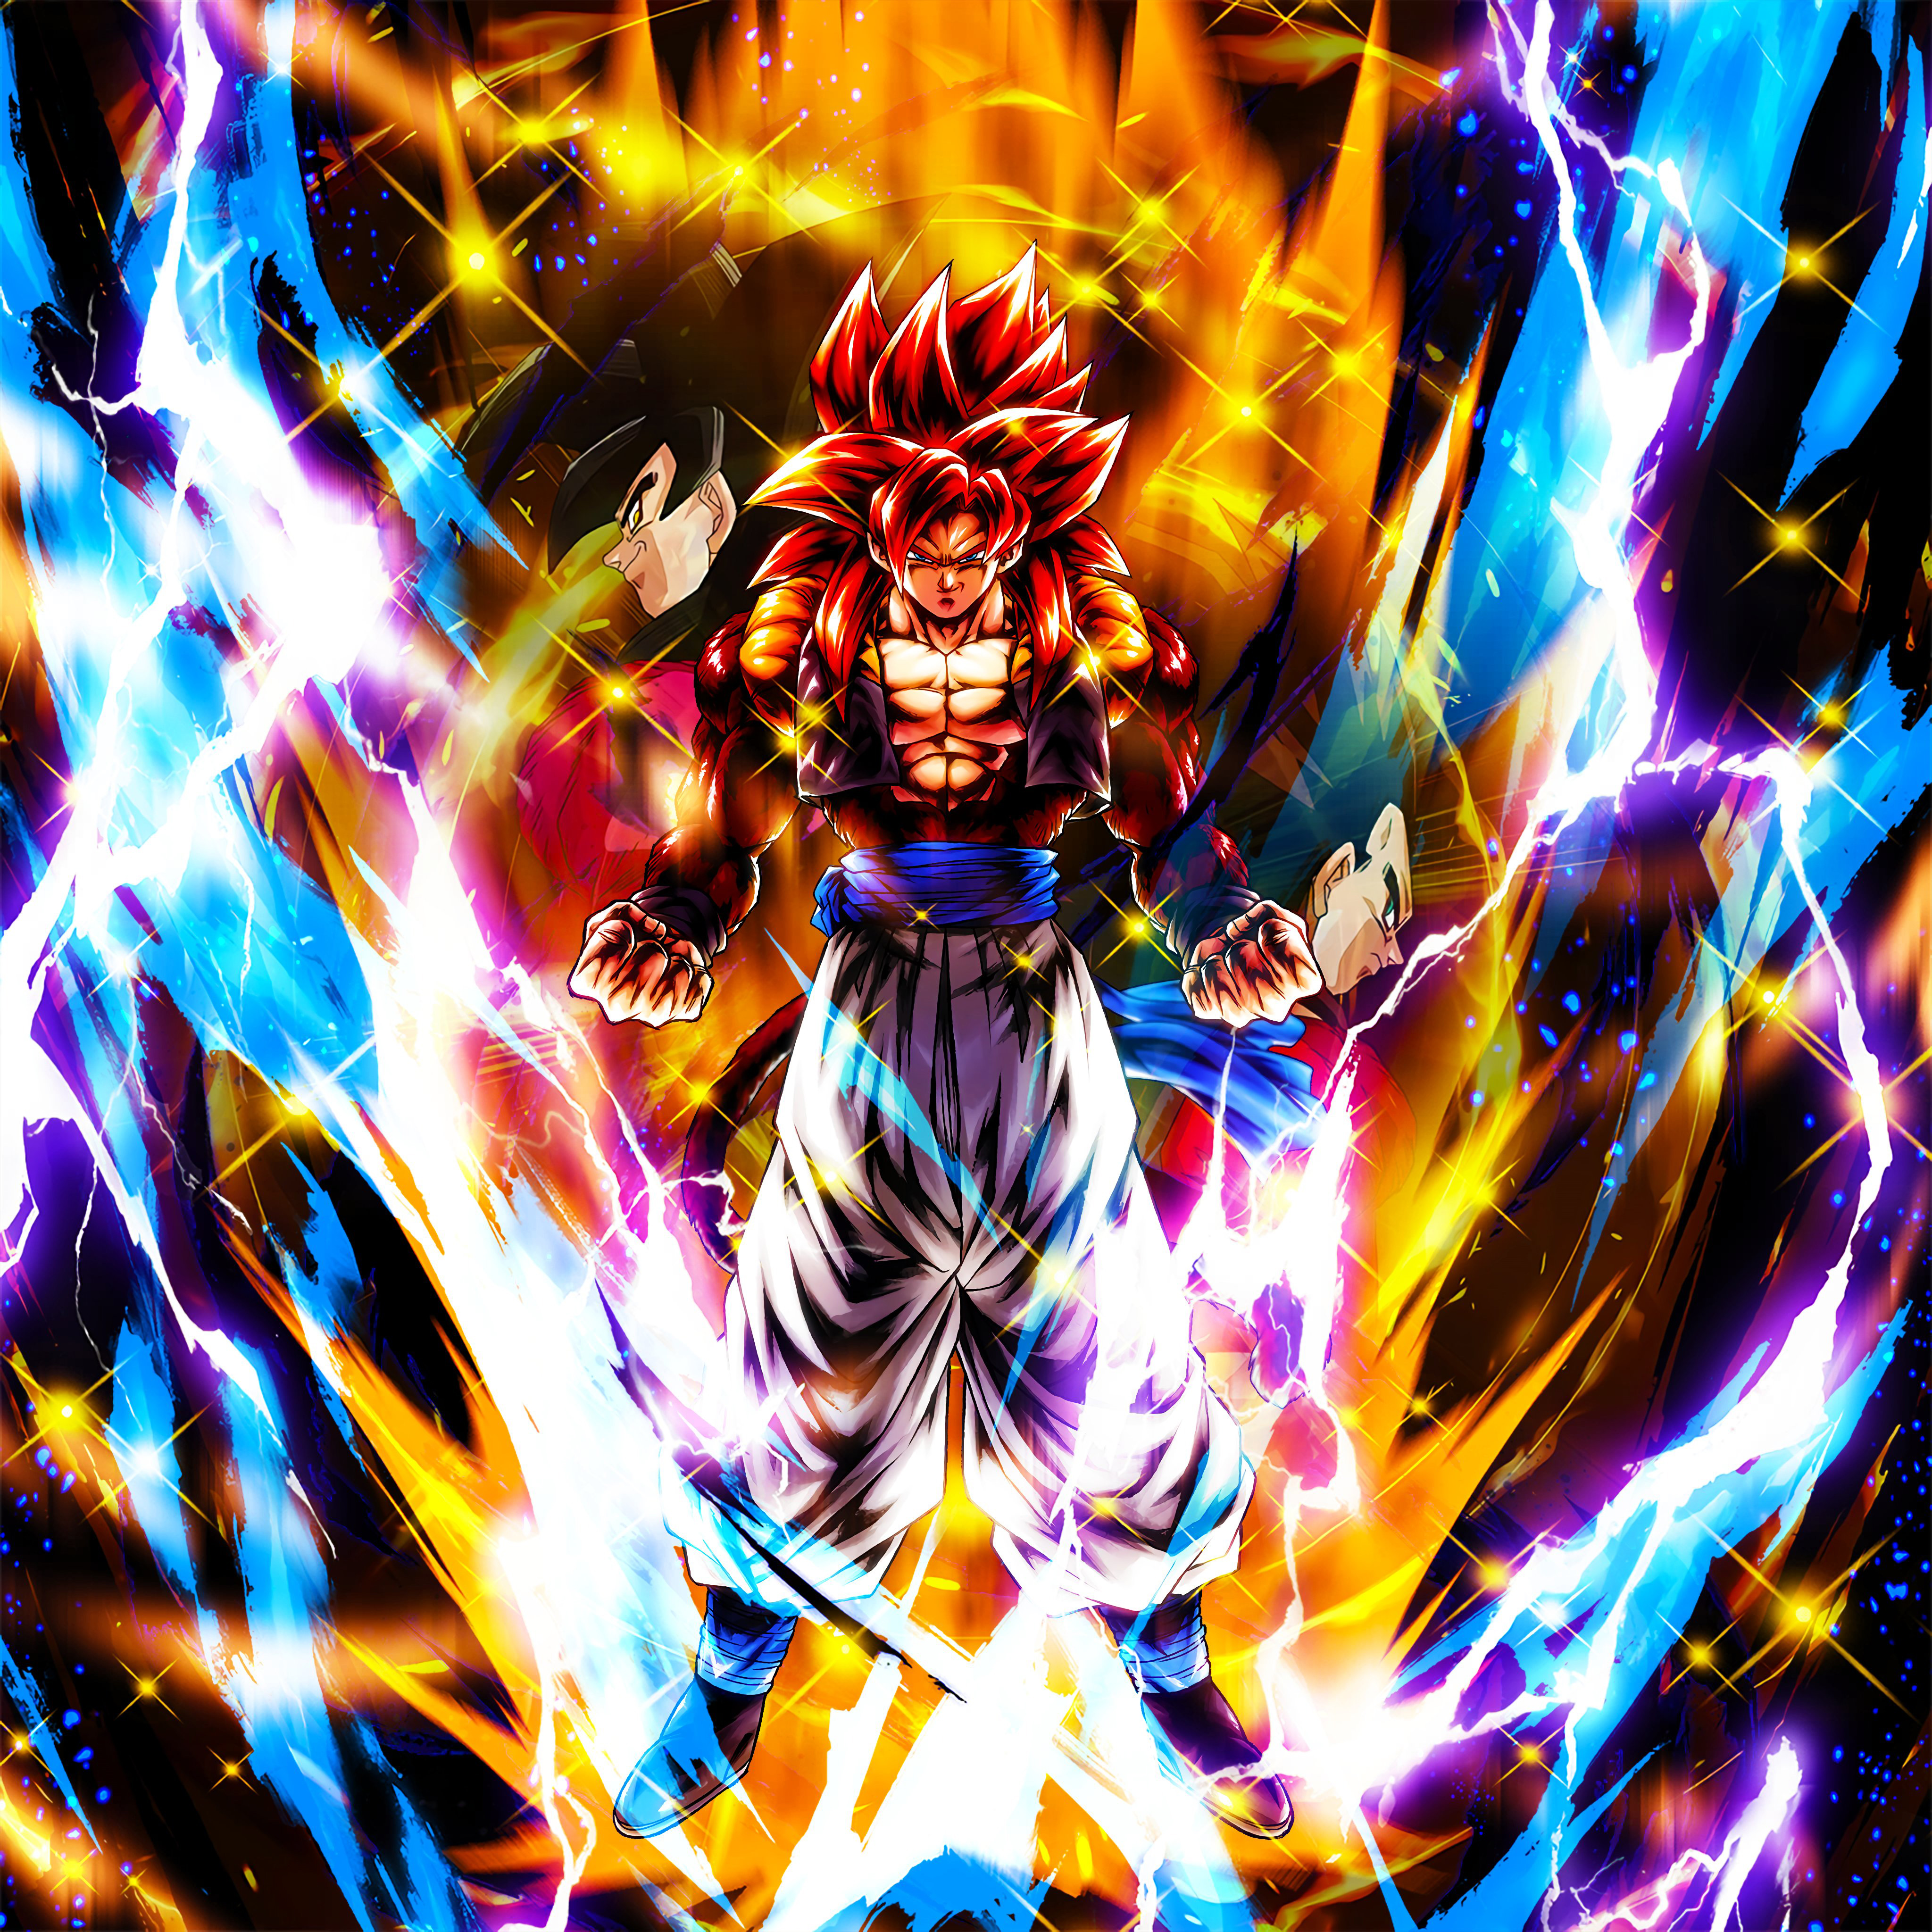 Super Saiyan 4 Gogeta avatar from Dragon Ball Legends video game, with dynamic energy effects.